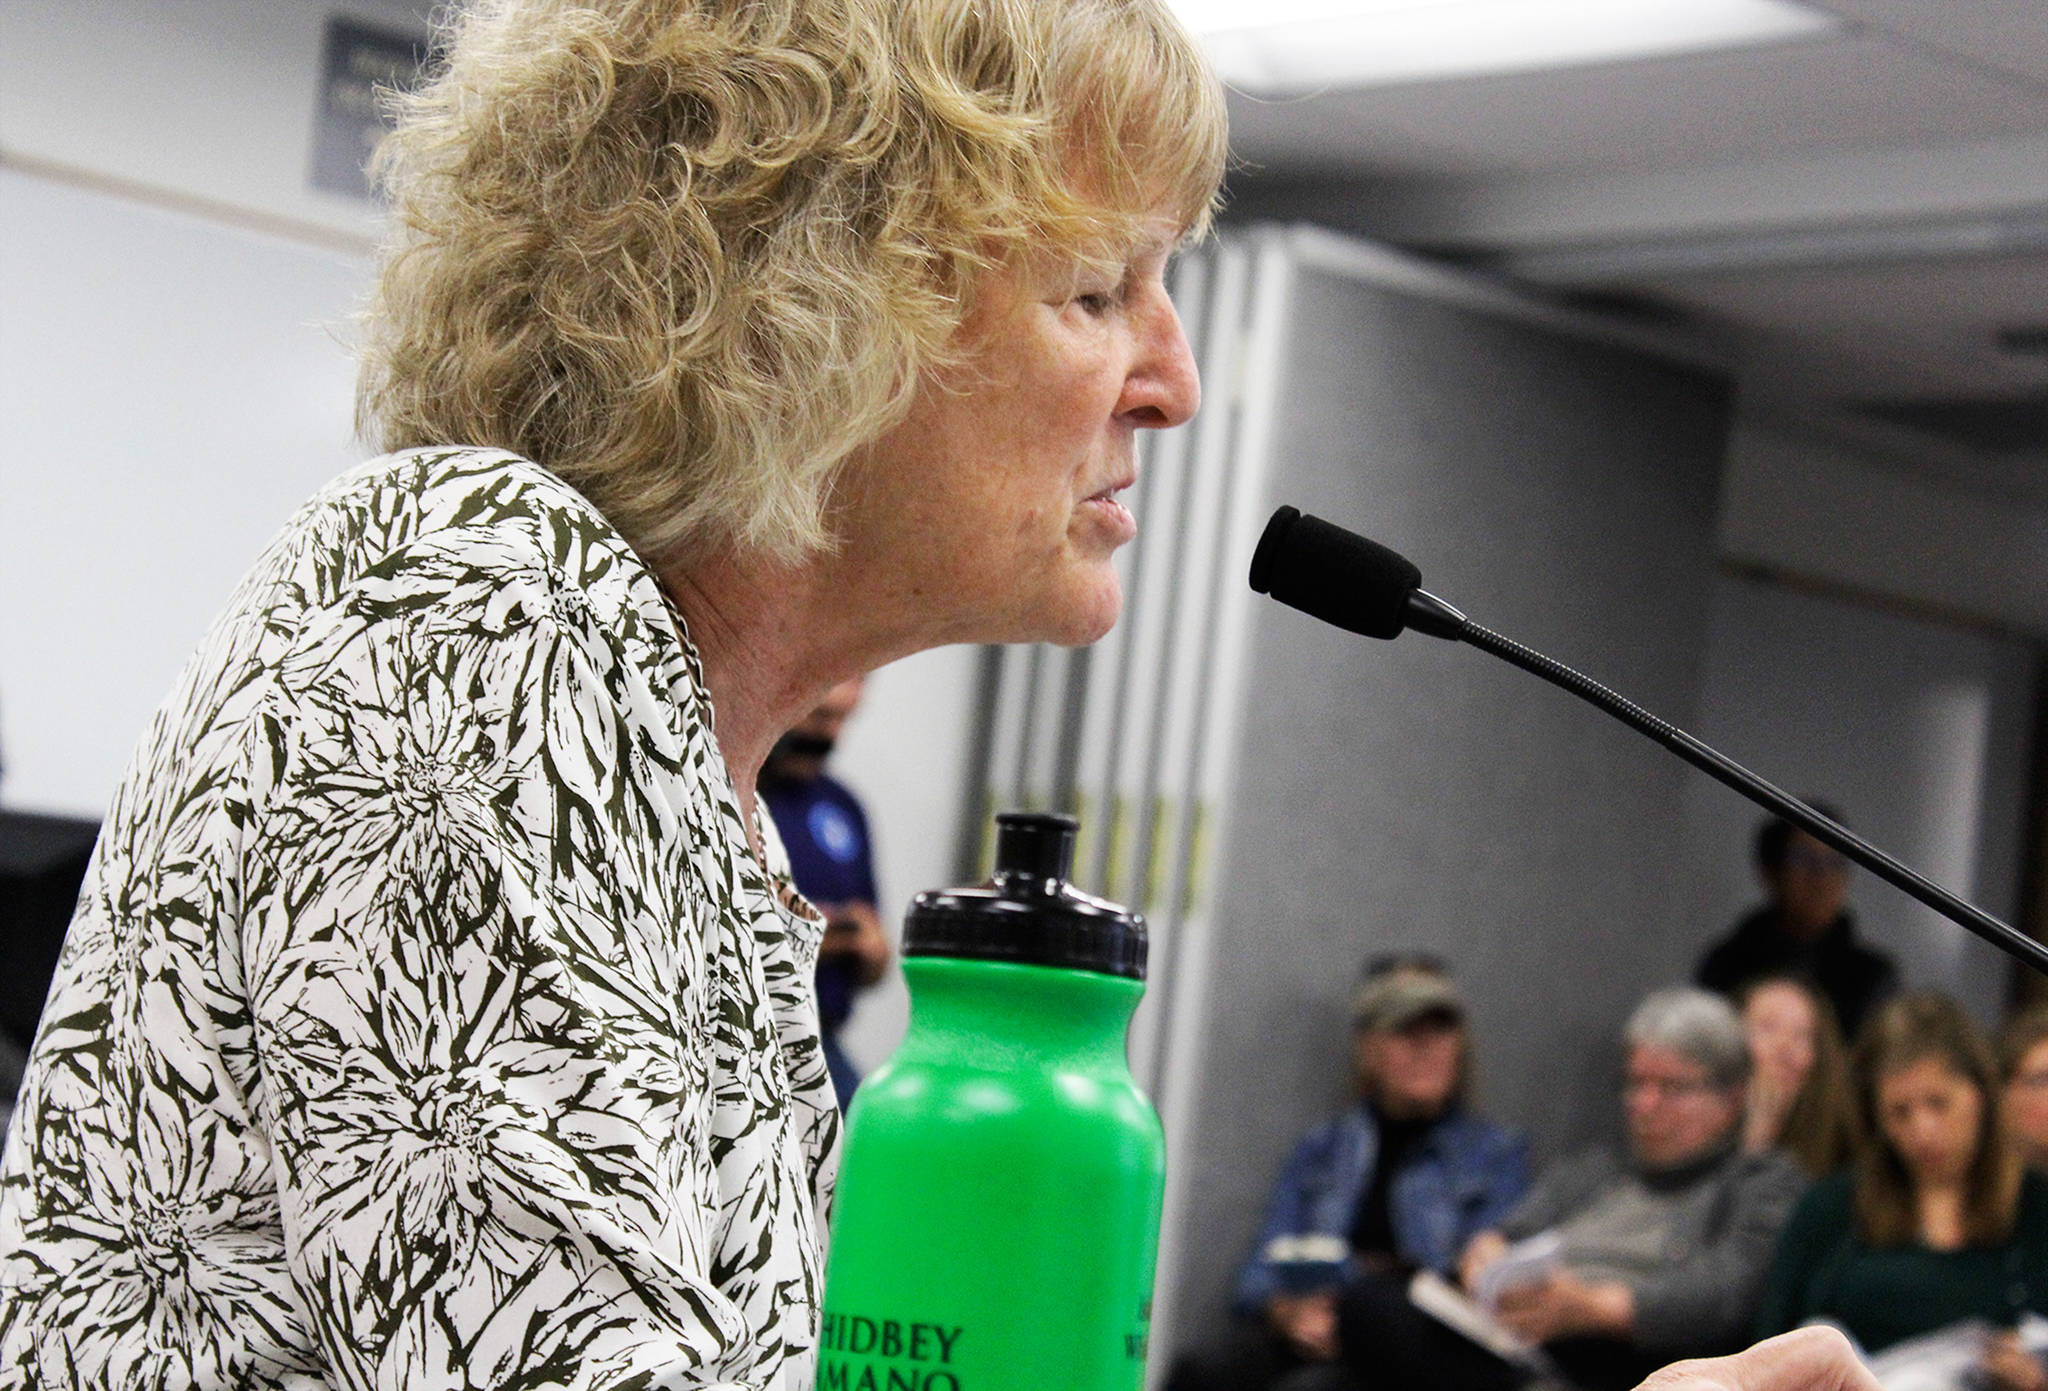 Pat Powell, executive director of Whidbey Camano Land Trust, presents details of the Walking Ebey’s Trail Corridor project at a recent Island County Commissioners meeting. In a 2-1 vote, commissioners approved $50,000 in Conservation Futures Fund for planning and construction of the trail network. Photo by Patricia Guthrie/Whidbey News Times